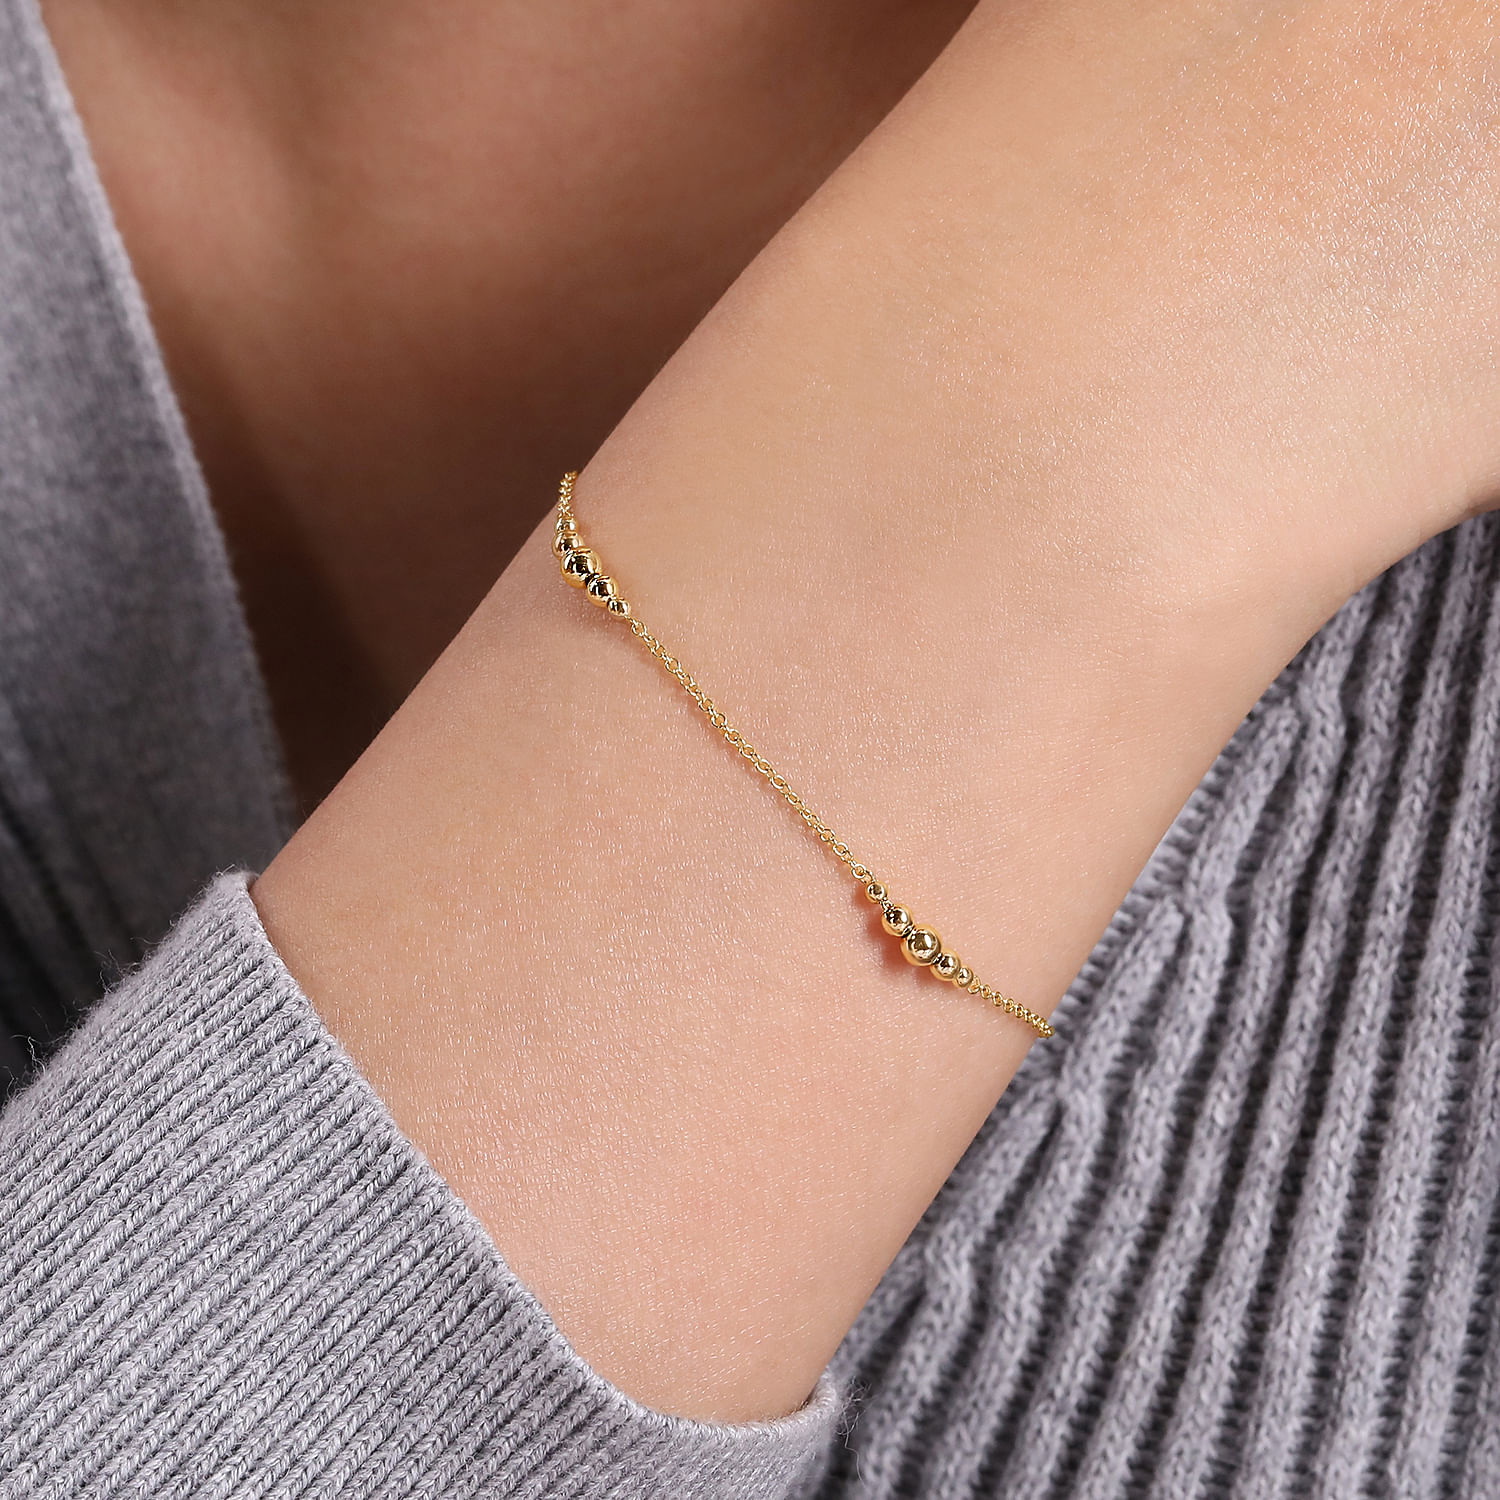 14K Yellow Gold Chain Bracelet with Graduating Bead Stations